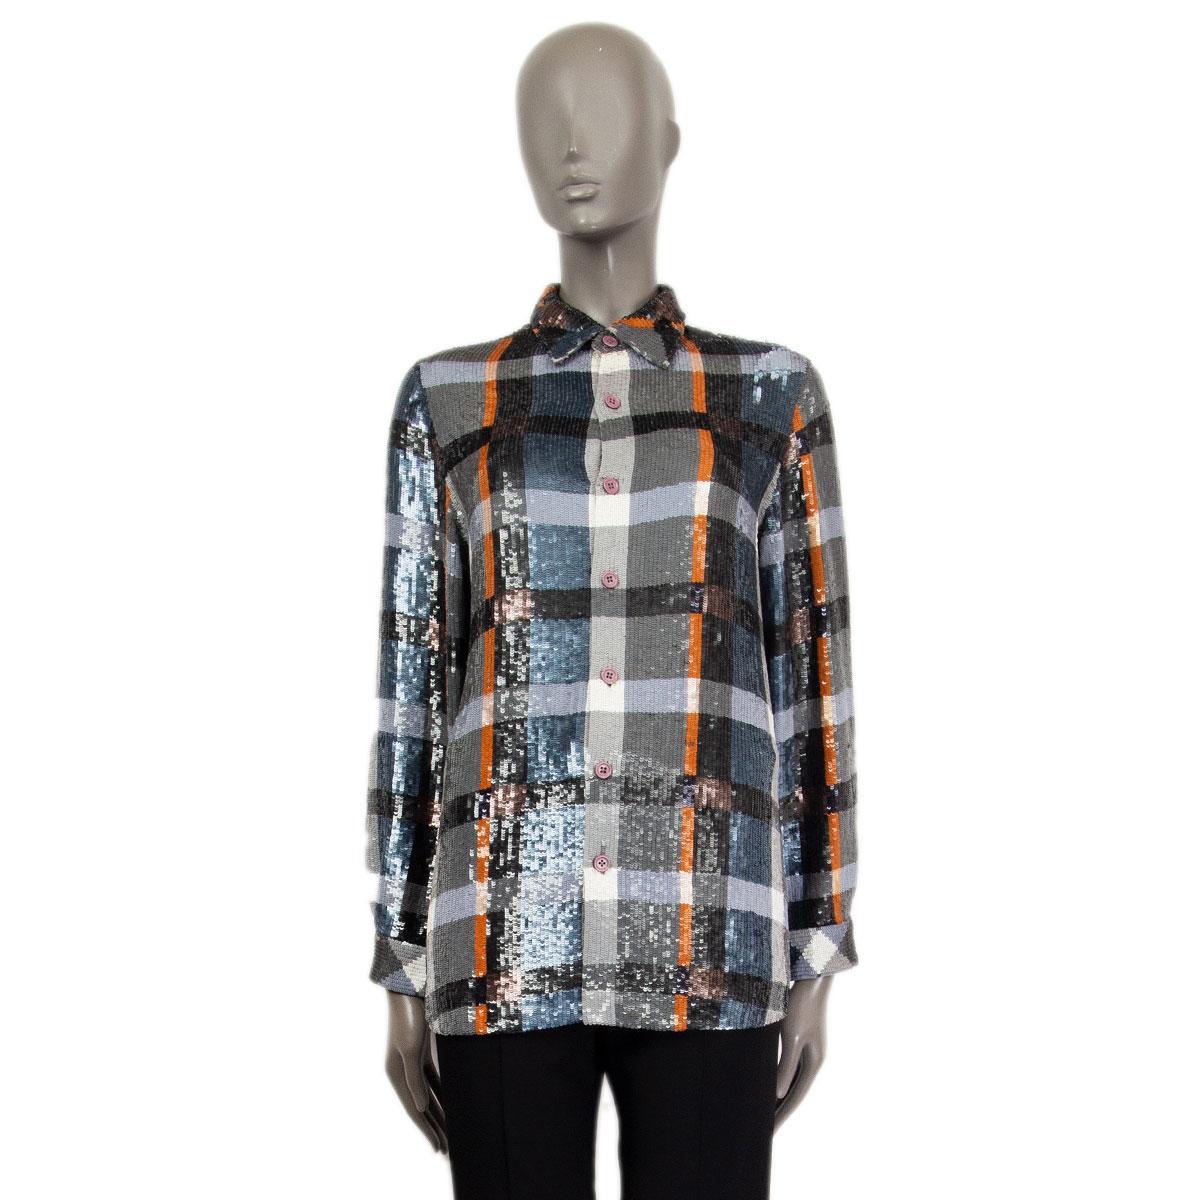 100% authentic Ashish check embellished sequins shirt in off-white, light gray, anthracite, taupe and bronze cotton (100%) botton-down with a pointy collar. Long sleeves with one button cuffs. Has been worn and is in excellent